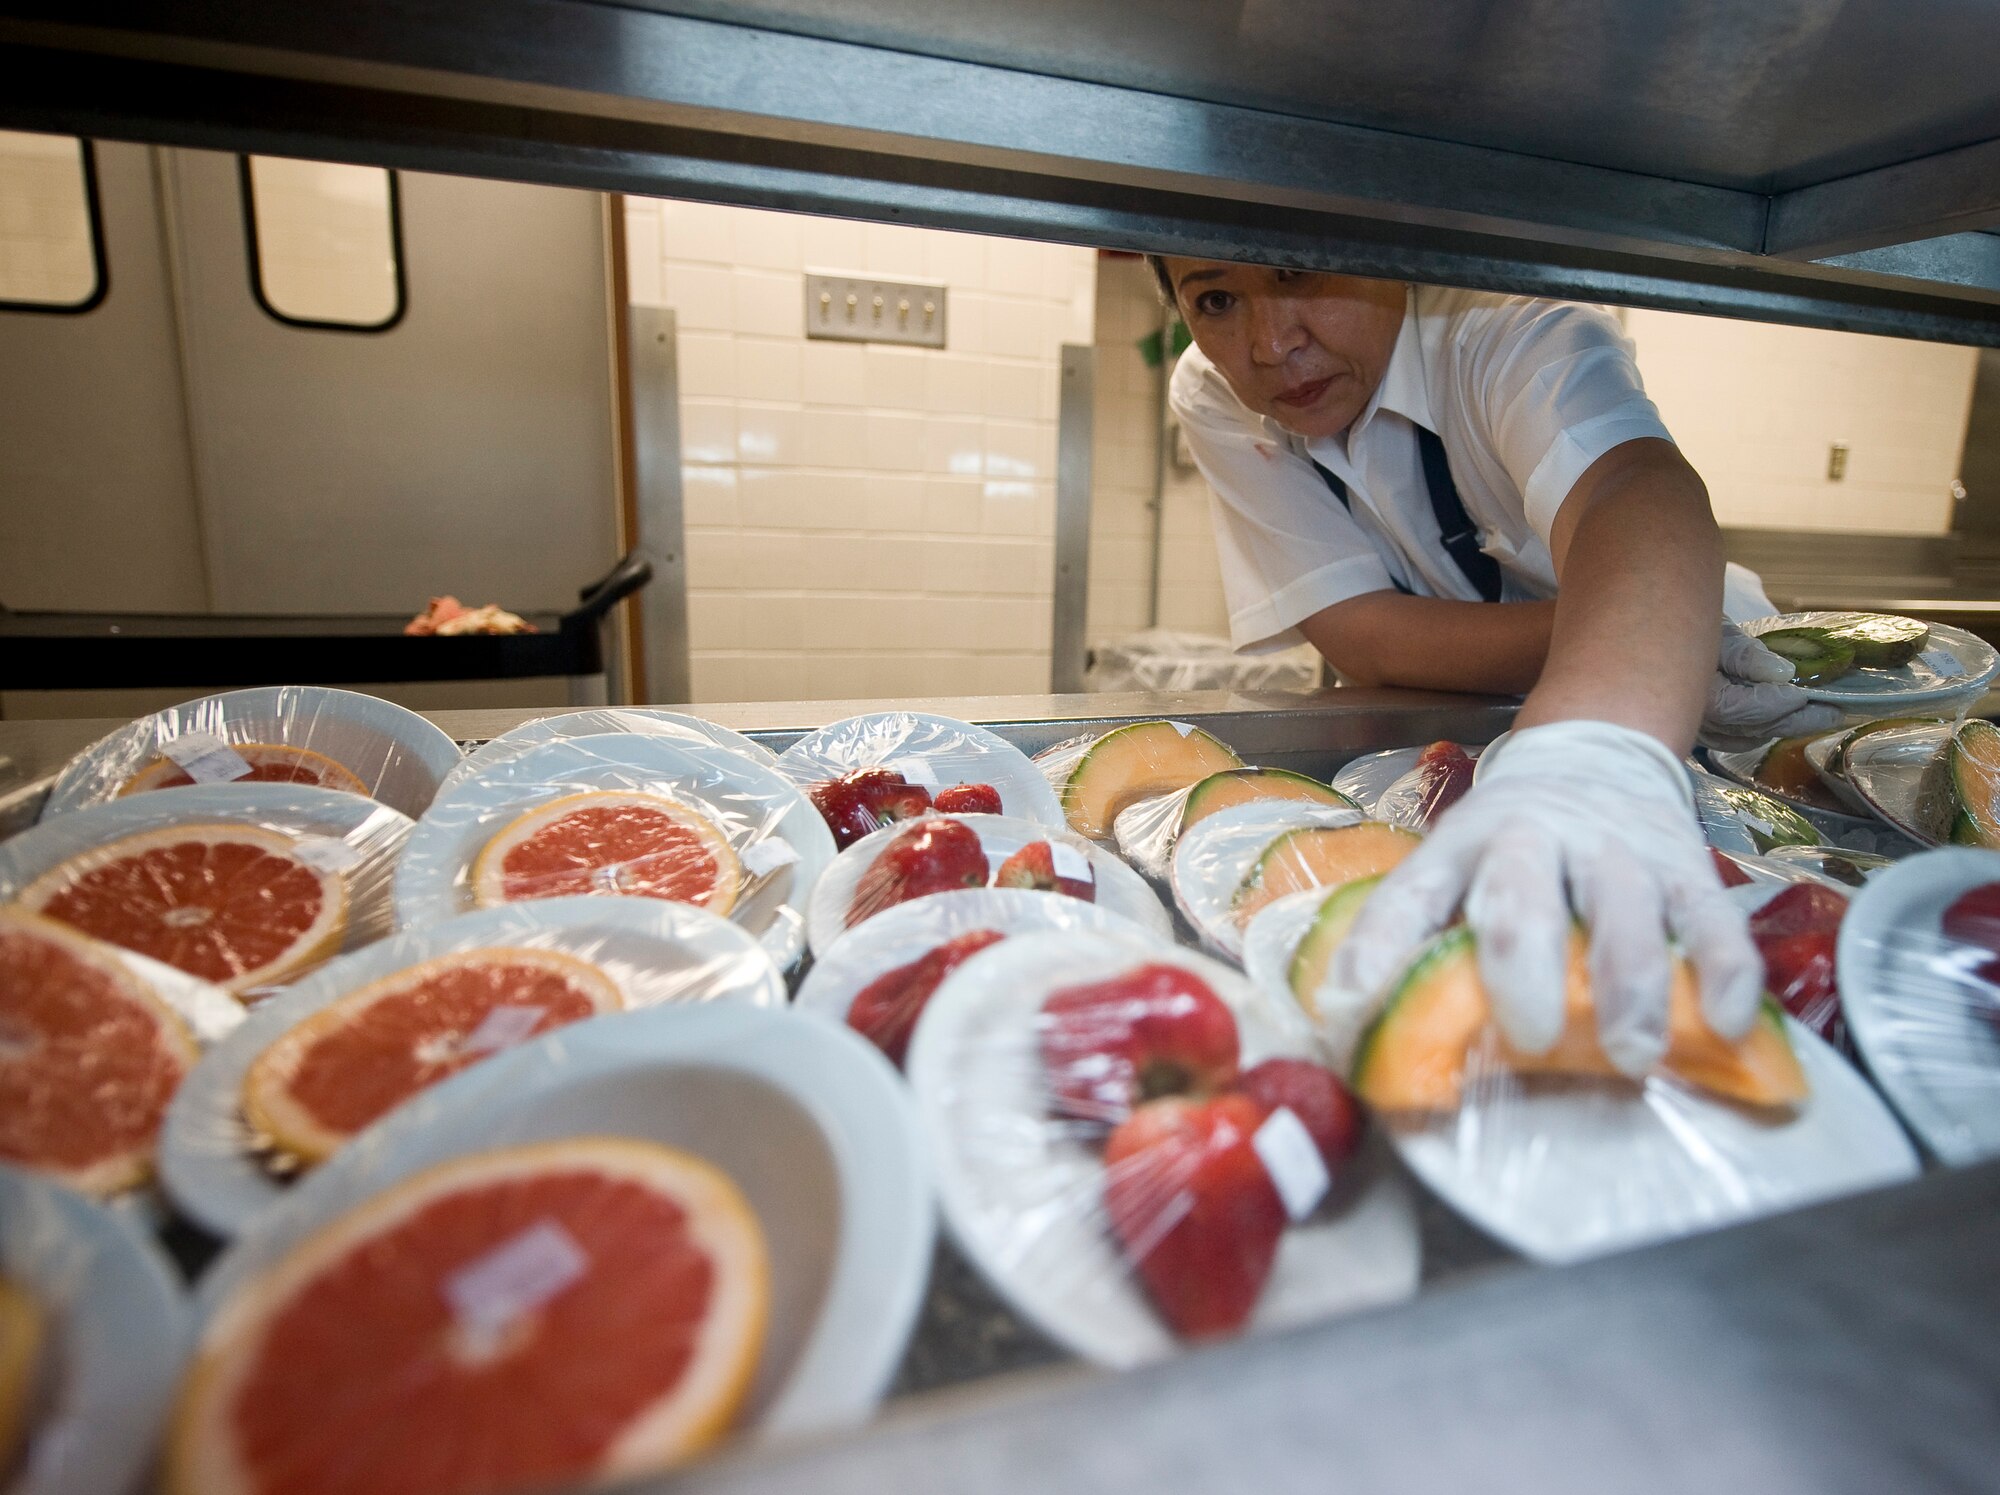 Song Su McNeese, 2nd Force Support Squadron, places fruit on the serving line in the Red River Dining Facility on Barksdale Air Force Base, La., June 6. Keeping a variety of fruit on the line gives patrons the option to add healthy side items to their meals. (U.S. Air Force photo/Staff Sgt. Chad Warren)(RELEASED)